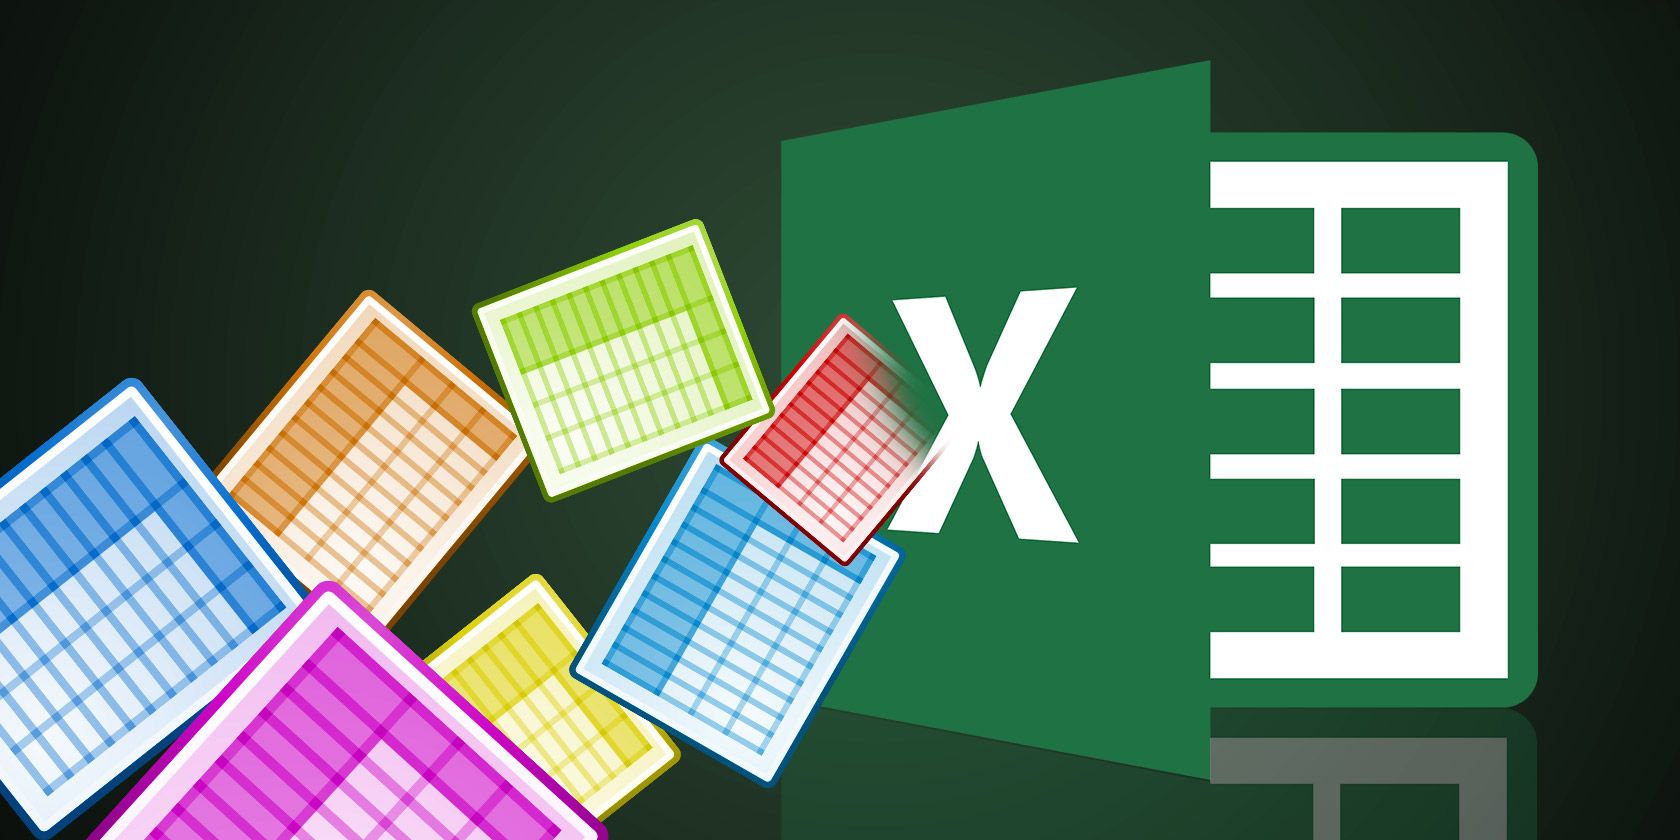 uses for the microsoft excel spreadsheet